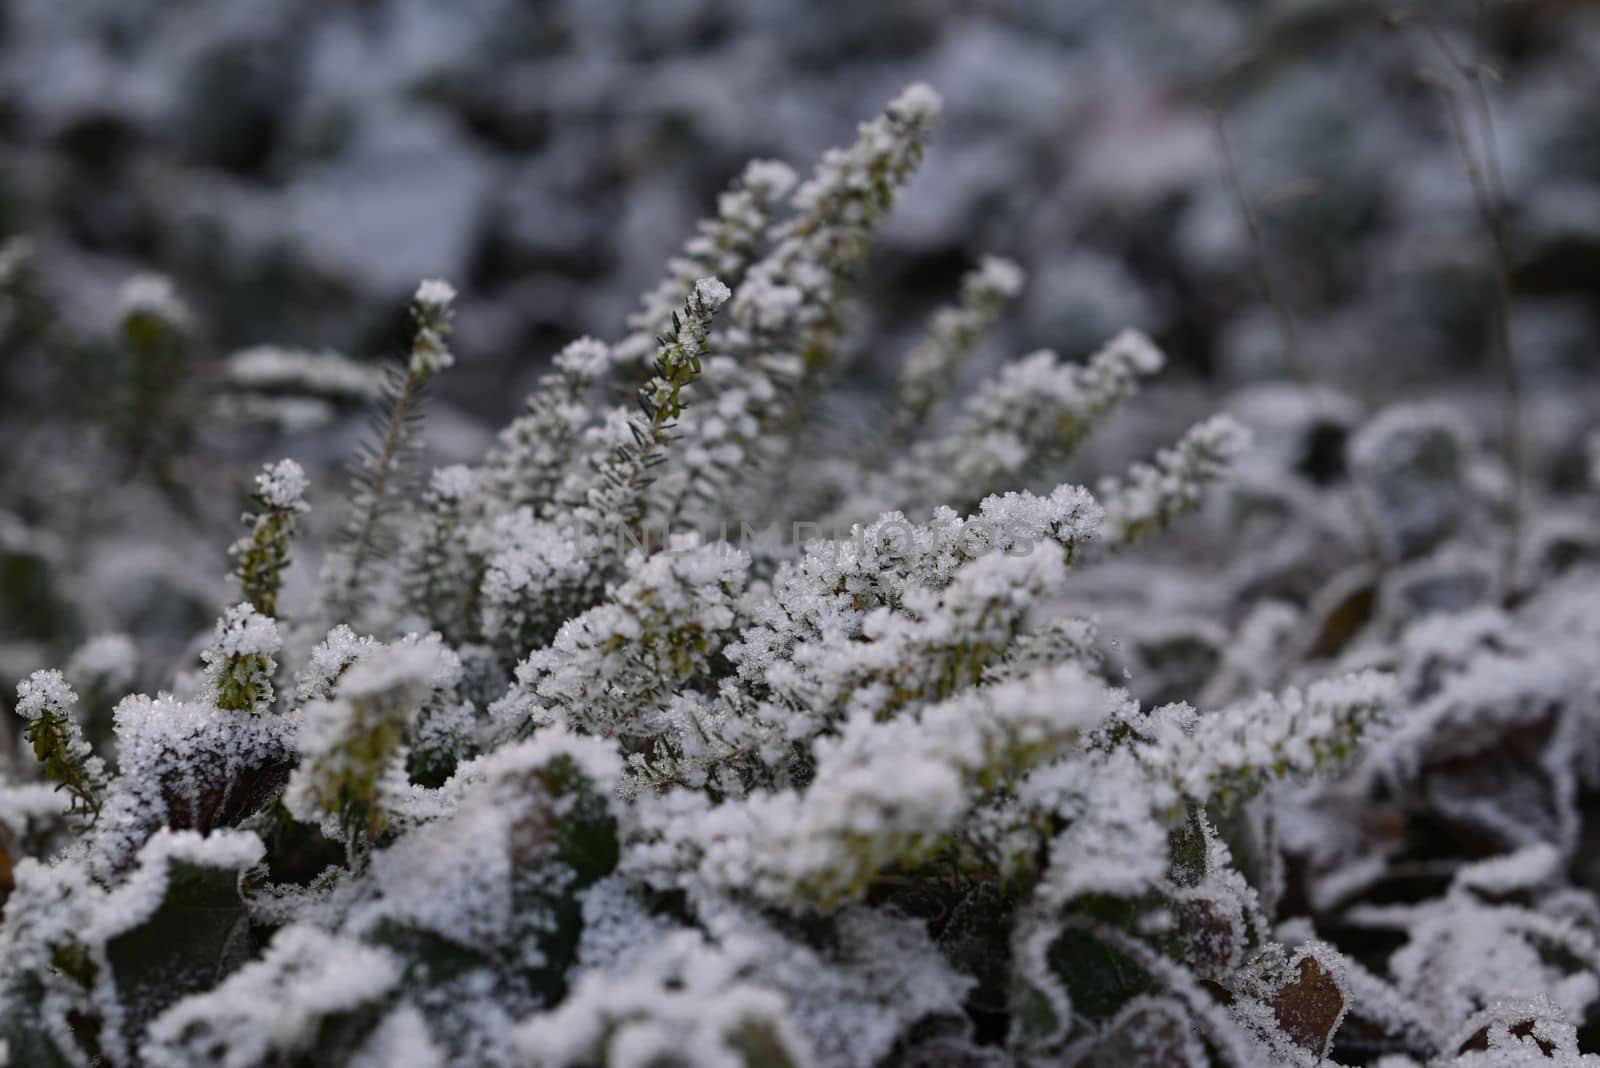 green plant outside with hoarfrost as a close-up